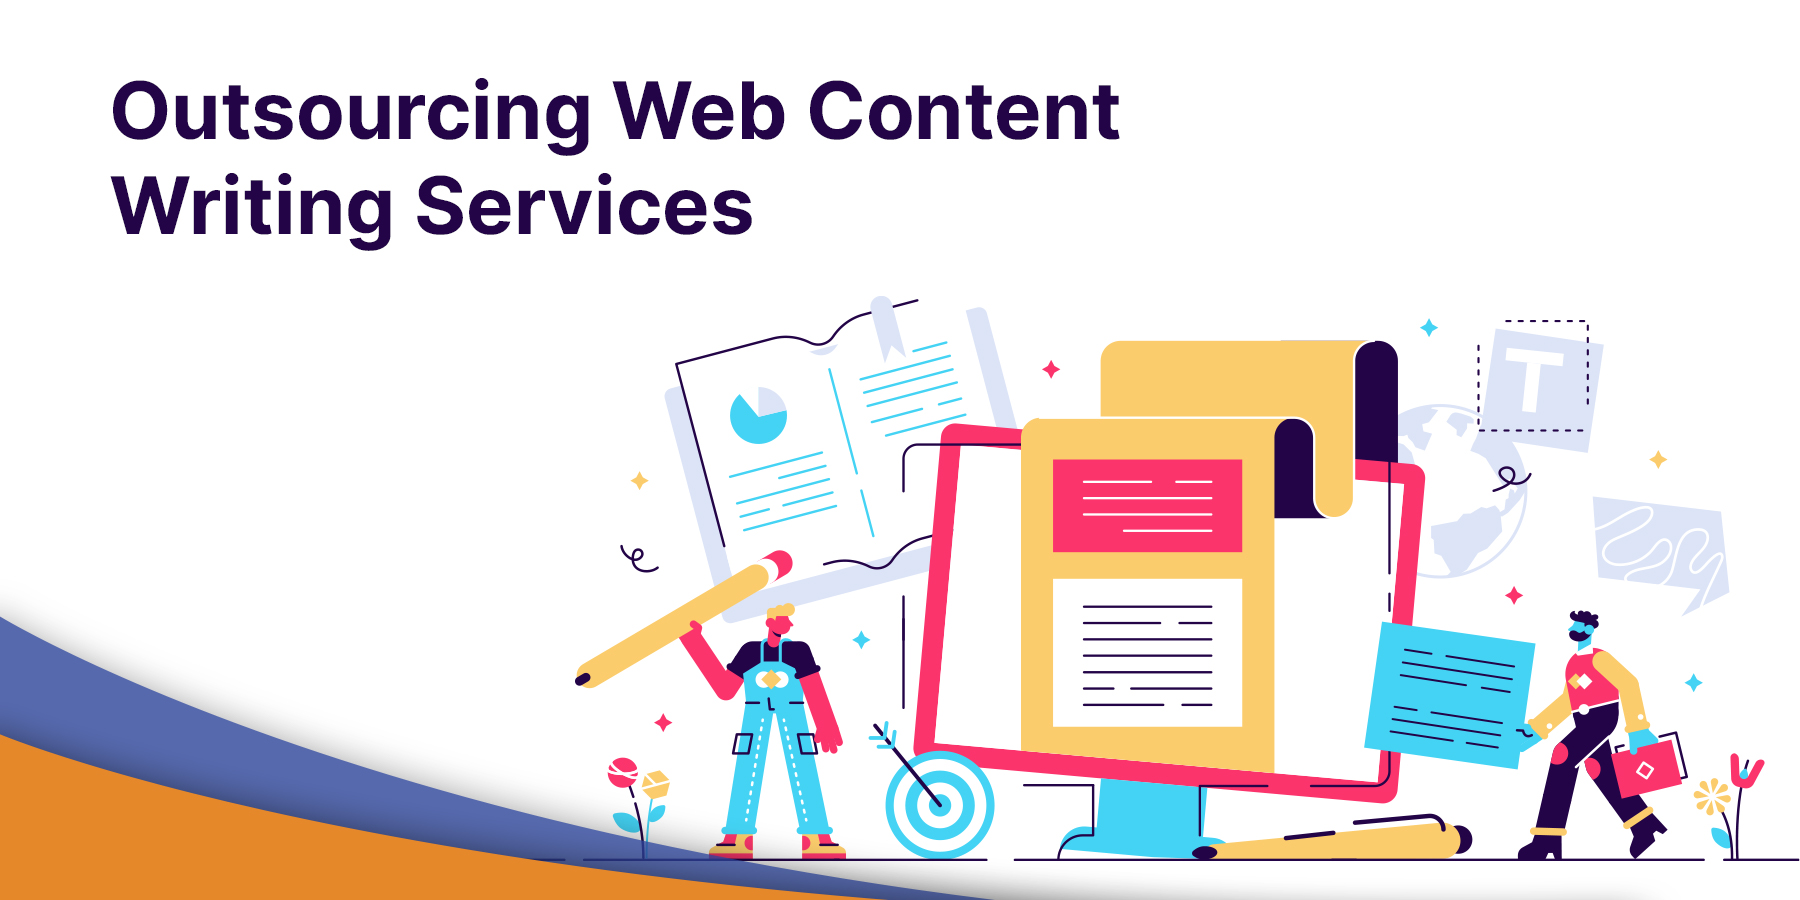 Outsourcing Web Content Writing Services